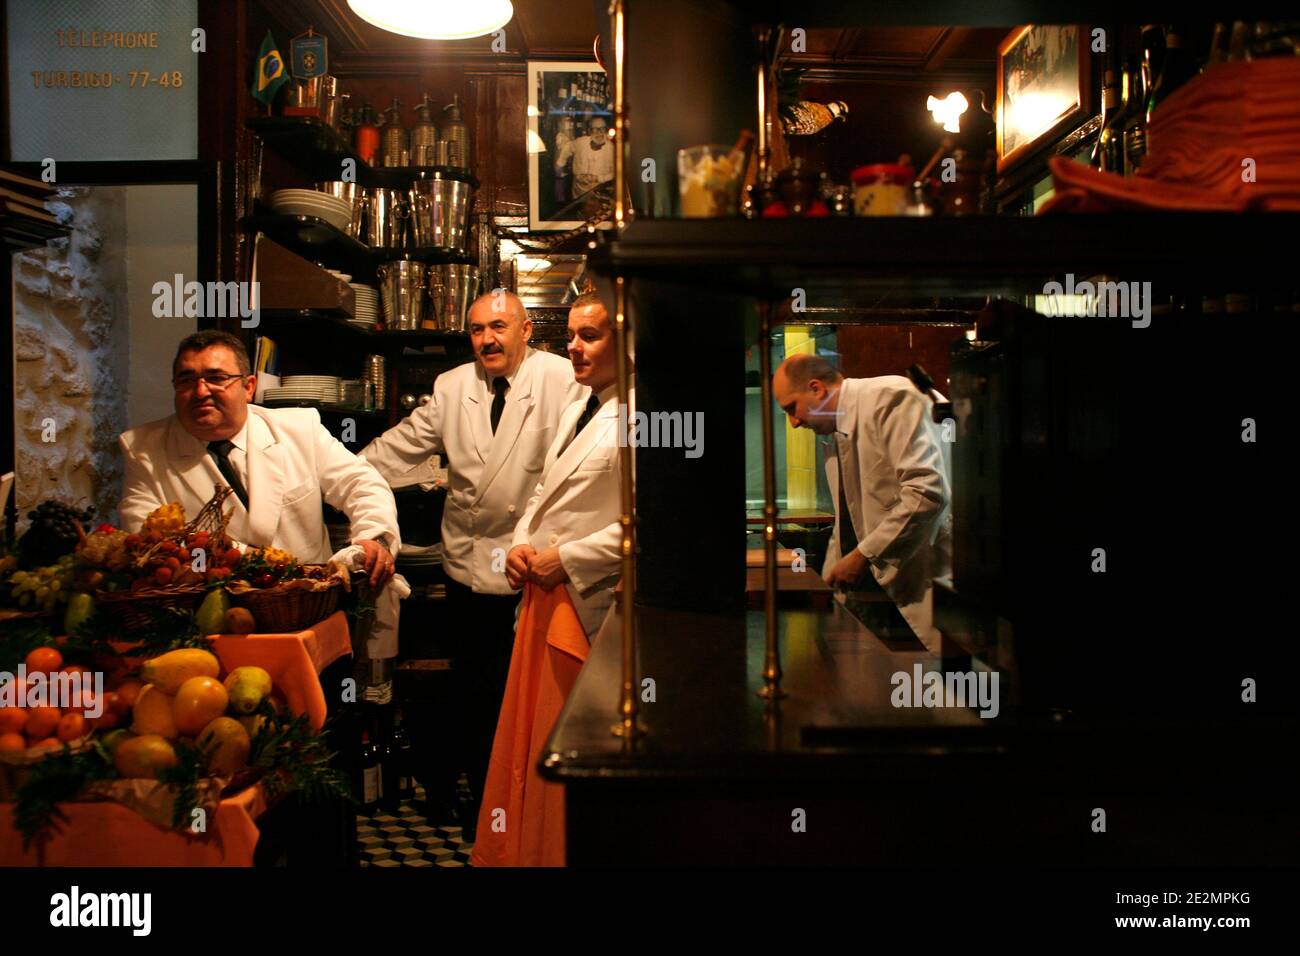 Louis Gadby, one of both owners, and his team pictured at L'Ami Louis restaurant in Paris, France December 11, 2009. Photo by Jean-Luc Luyssen/ABACAPRESS.COM Stock Photo